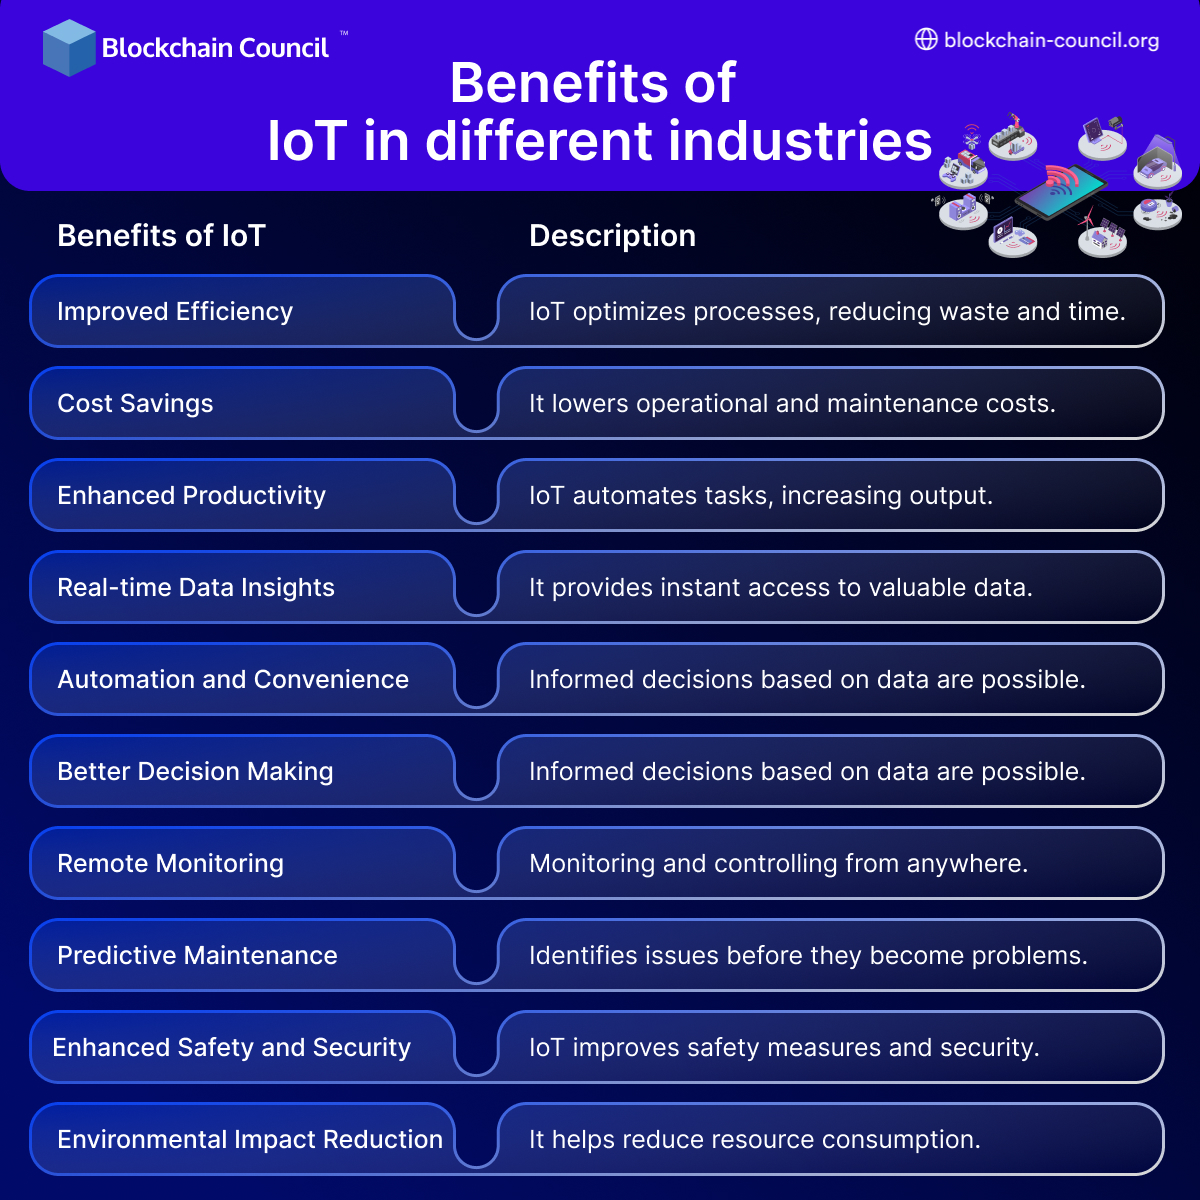 Benefits of IoT in different industries